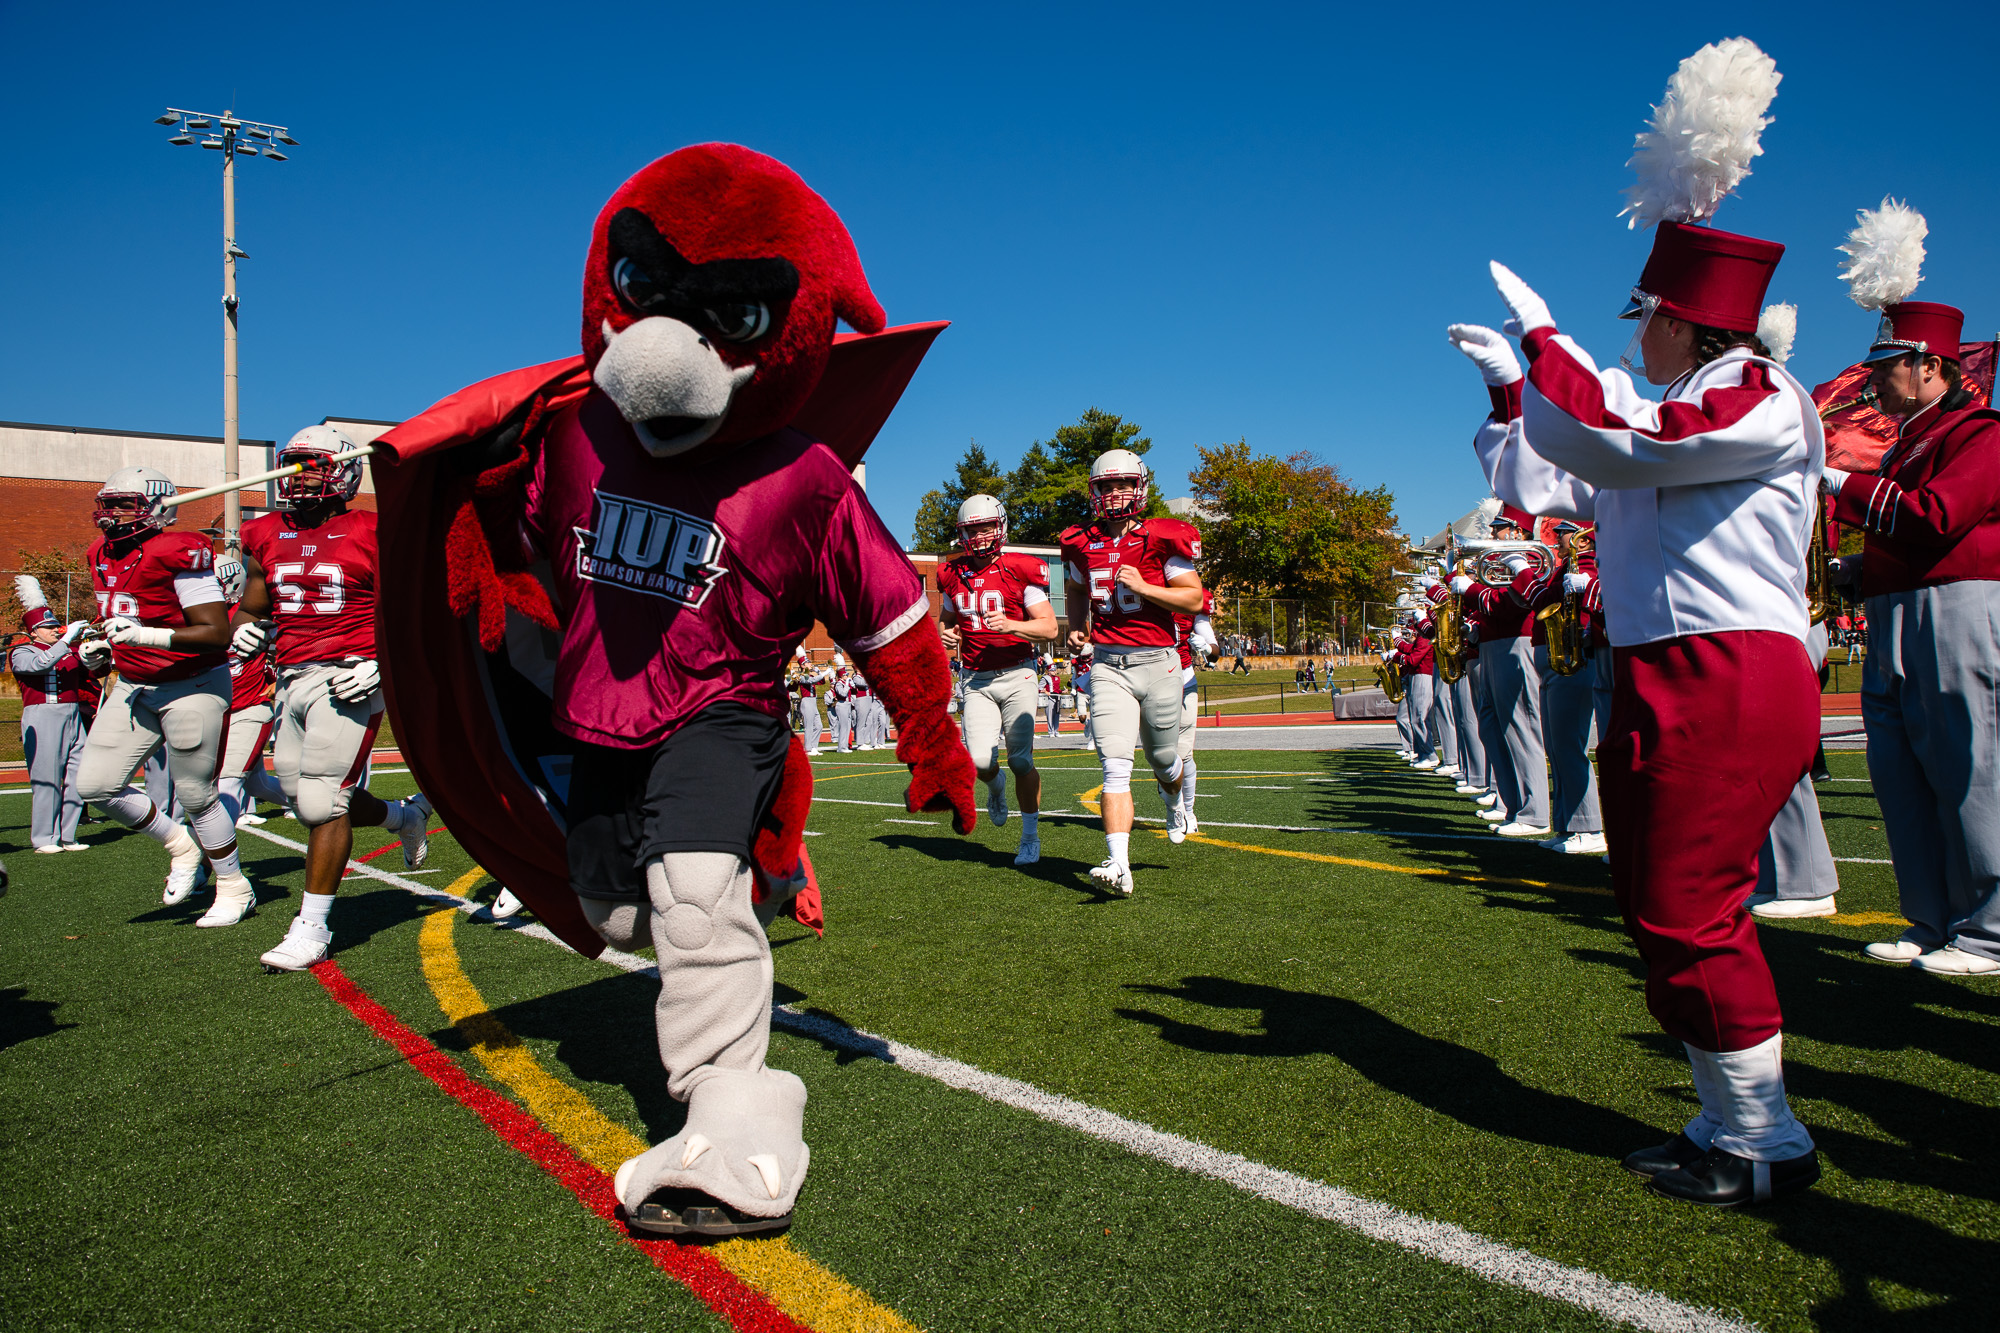 The IUP mascot, Norm, leads the football team out onto the field before the start of the game against Cal U.